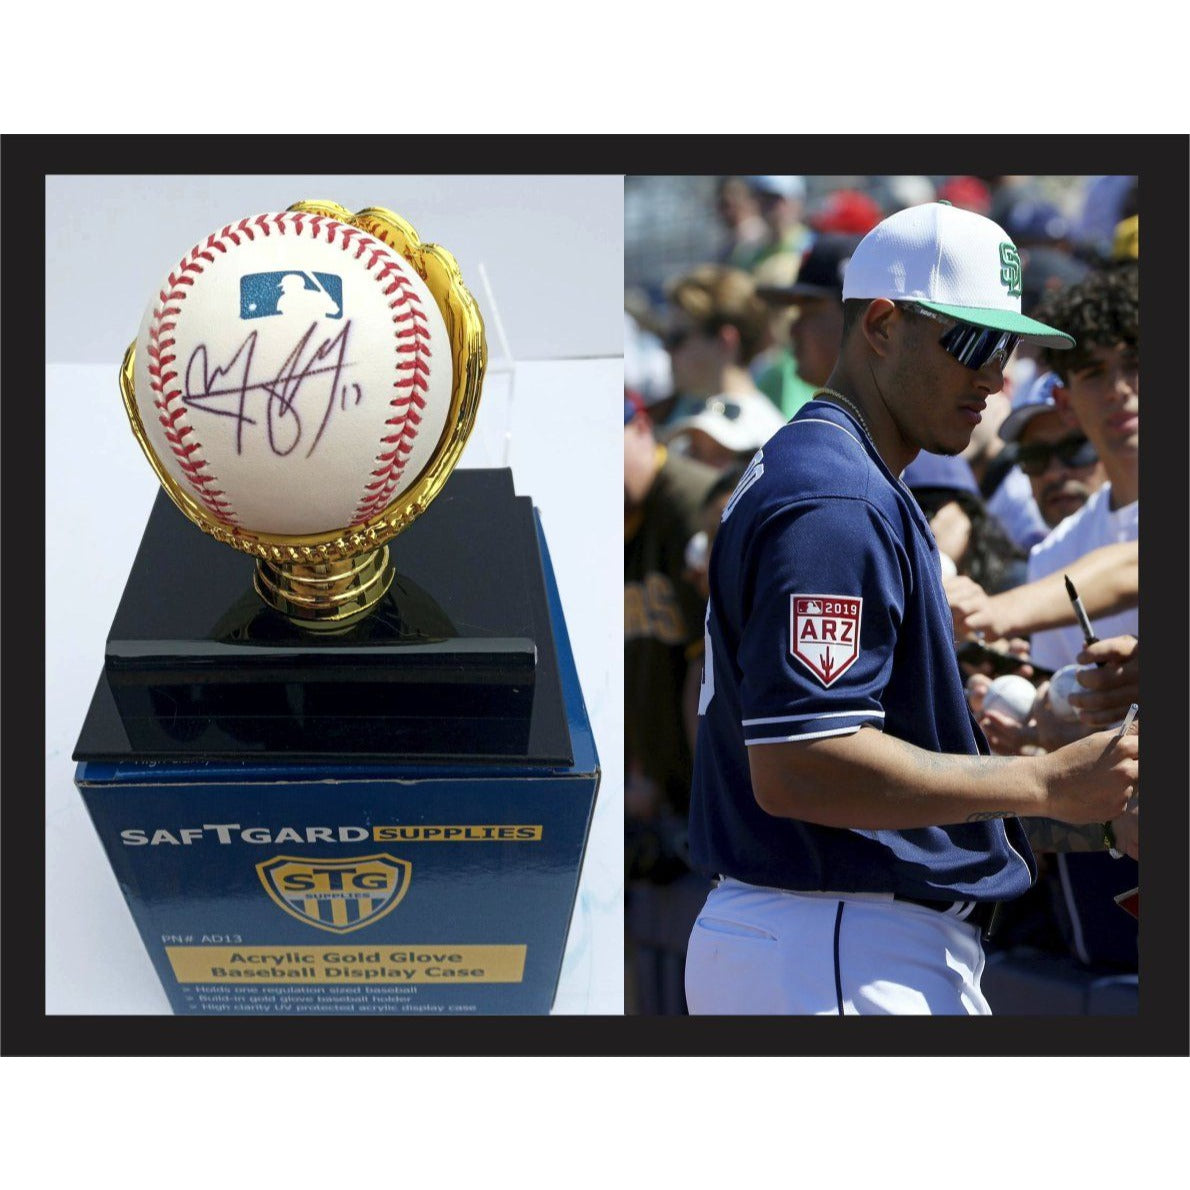 Manny Machado San Diego Padres official MLB Rawlings Baseball signed with proof with free case